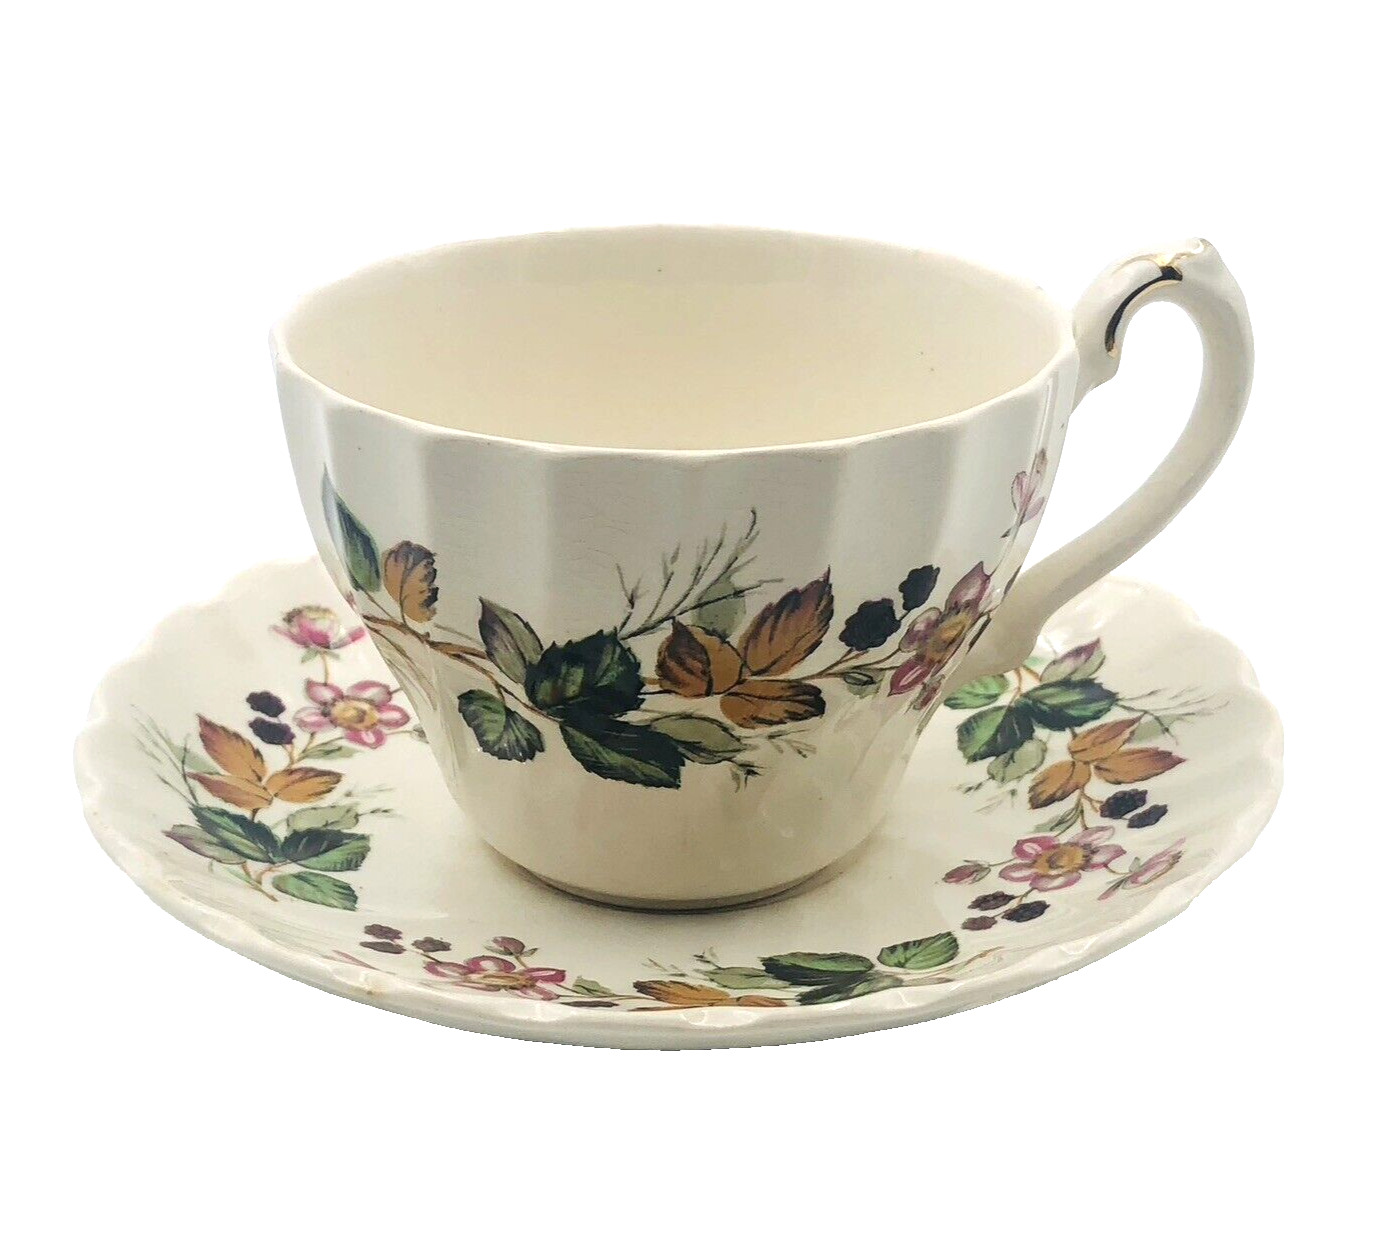 Set Hedgerow Olde Chelsea Staffordshire Tea Cup & Saucer rare single Stamped cup